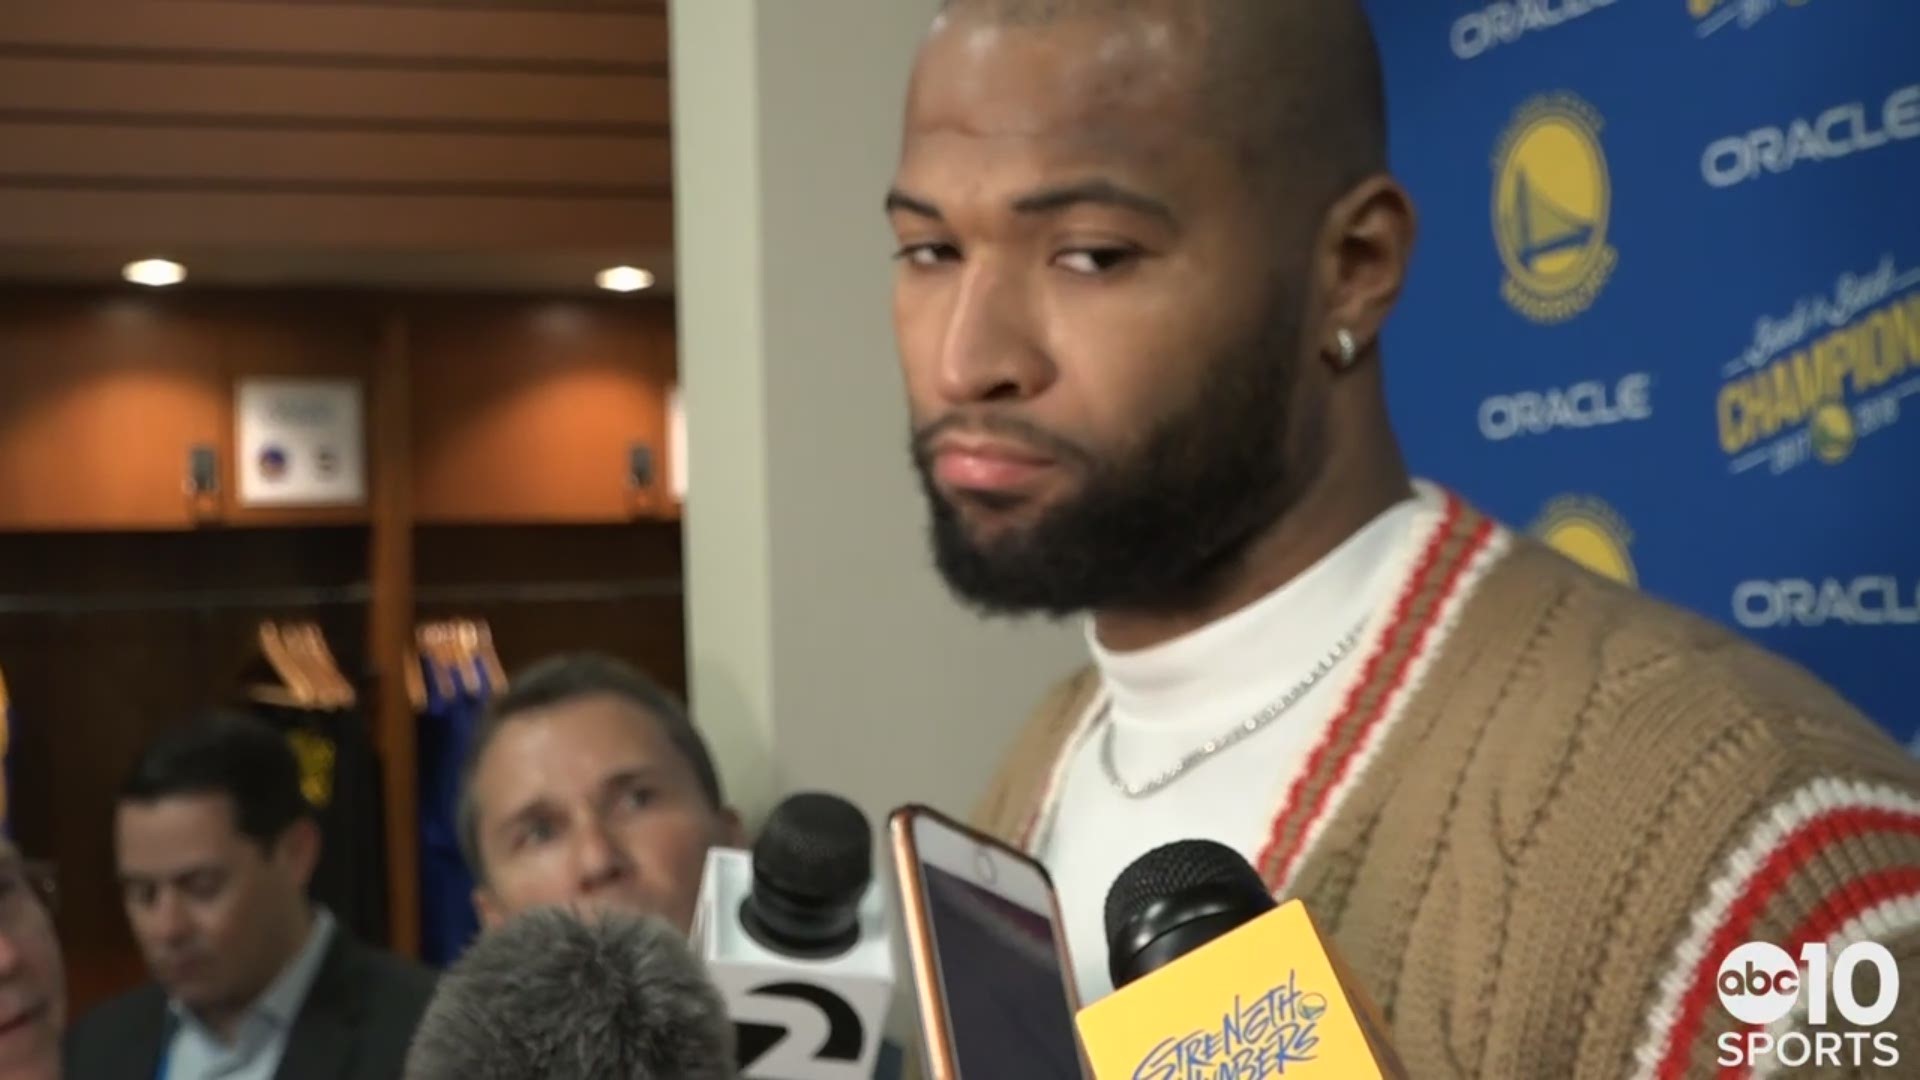 After his nine point and nine rebound performance before fouling out of Saturday's Game 1 win over the Clippers, Warriors' center DeMarcus Cousins talks about playing in the first ever playoff game in his 10th NBA season. He acknowledges how everything is more magnified in the playoffs, what nerves he may have experienced and the fun atmosphere at Oracle Arena.